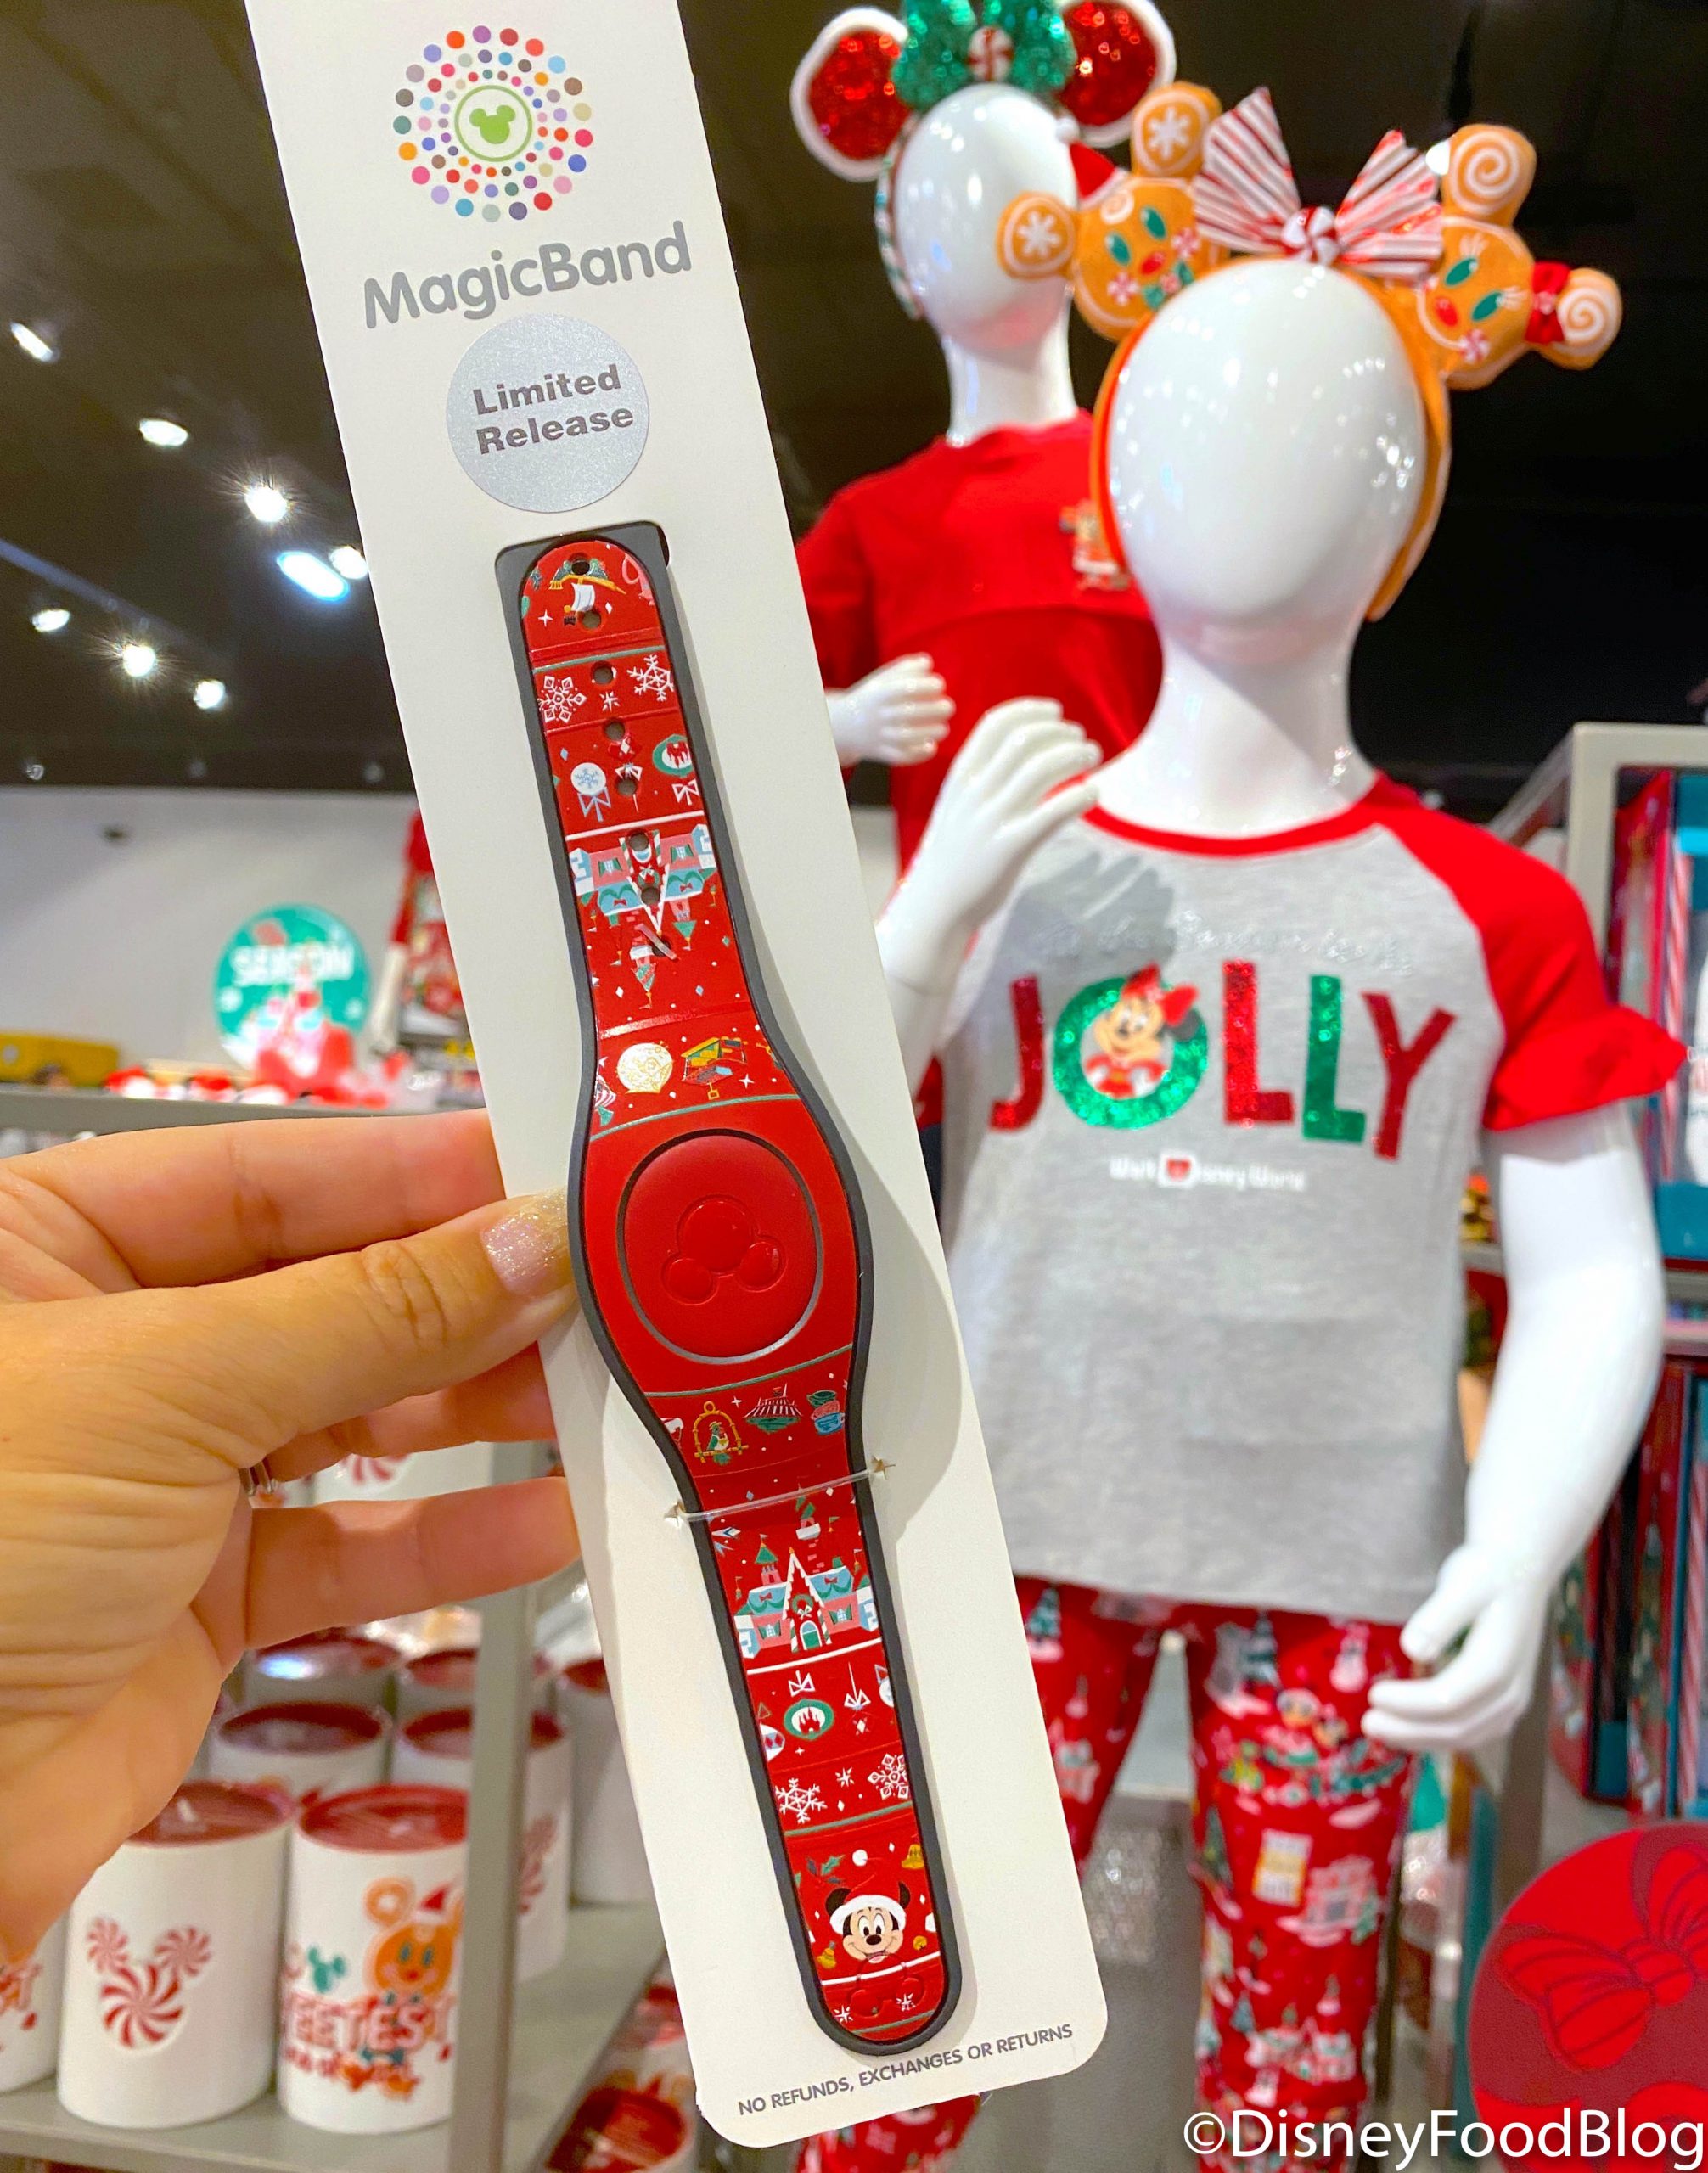 https://www.disneyfoodblog.com/wp-content/uploads/2020/10/2020-reopening-wdw-epcot-mousegear-christmas-holiday-magicband-scaled.jpg